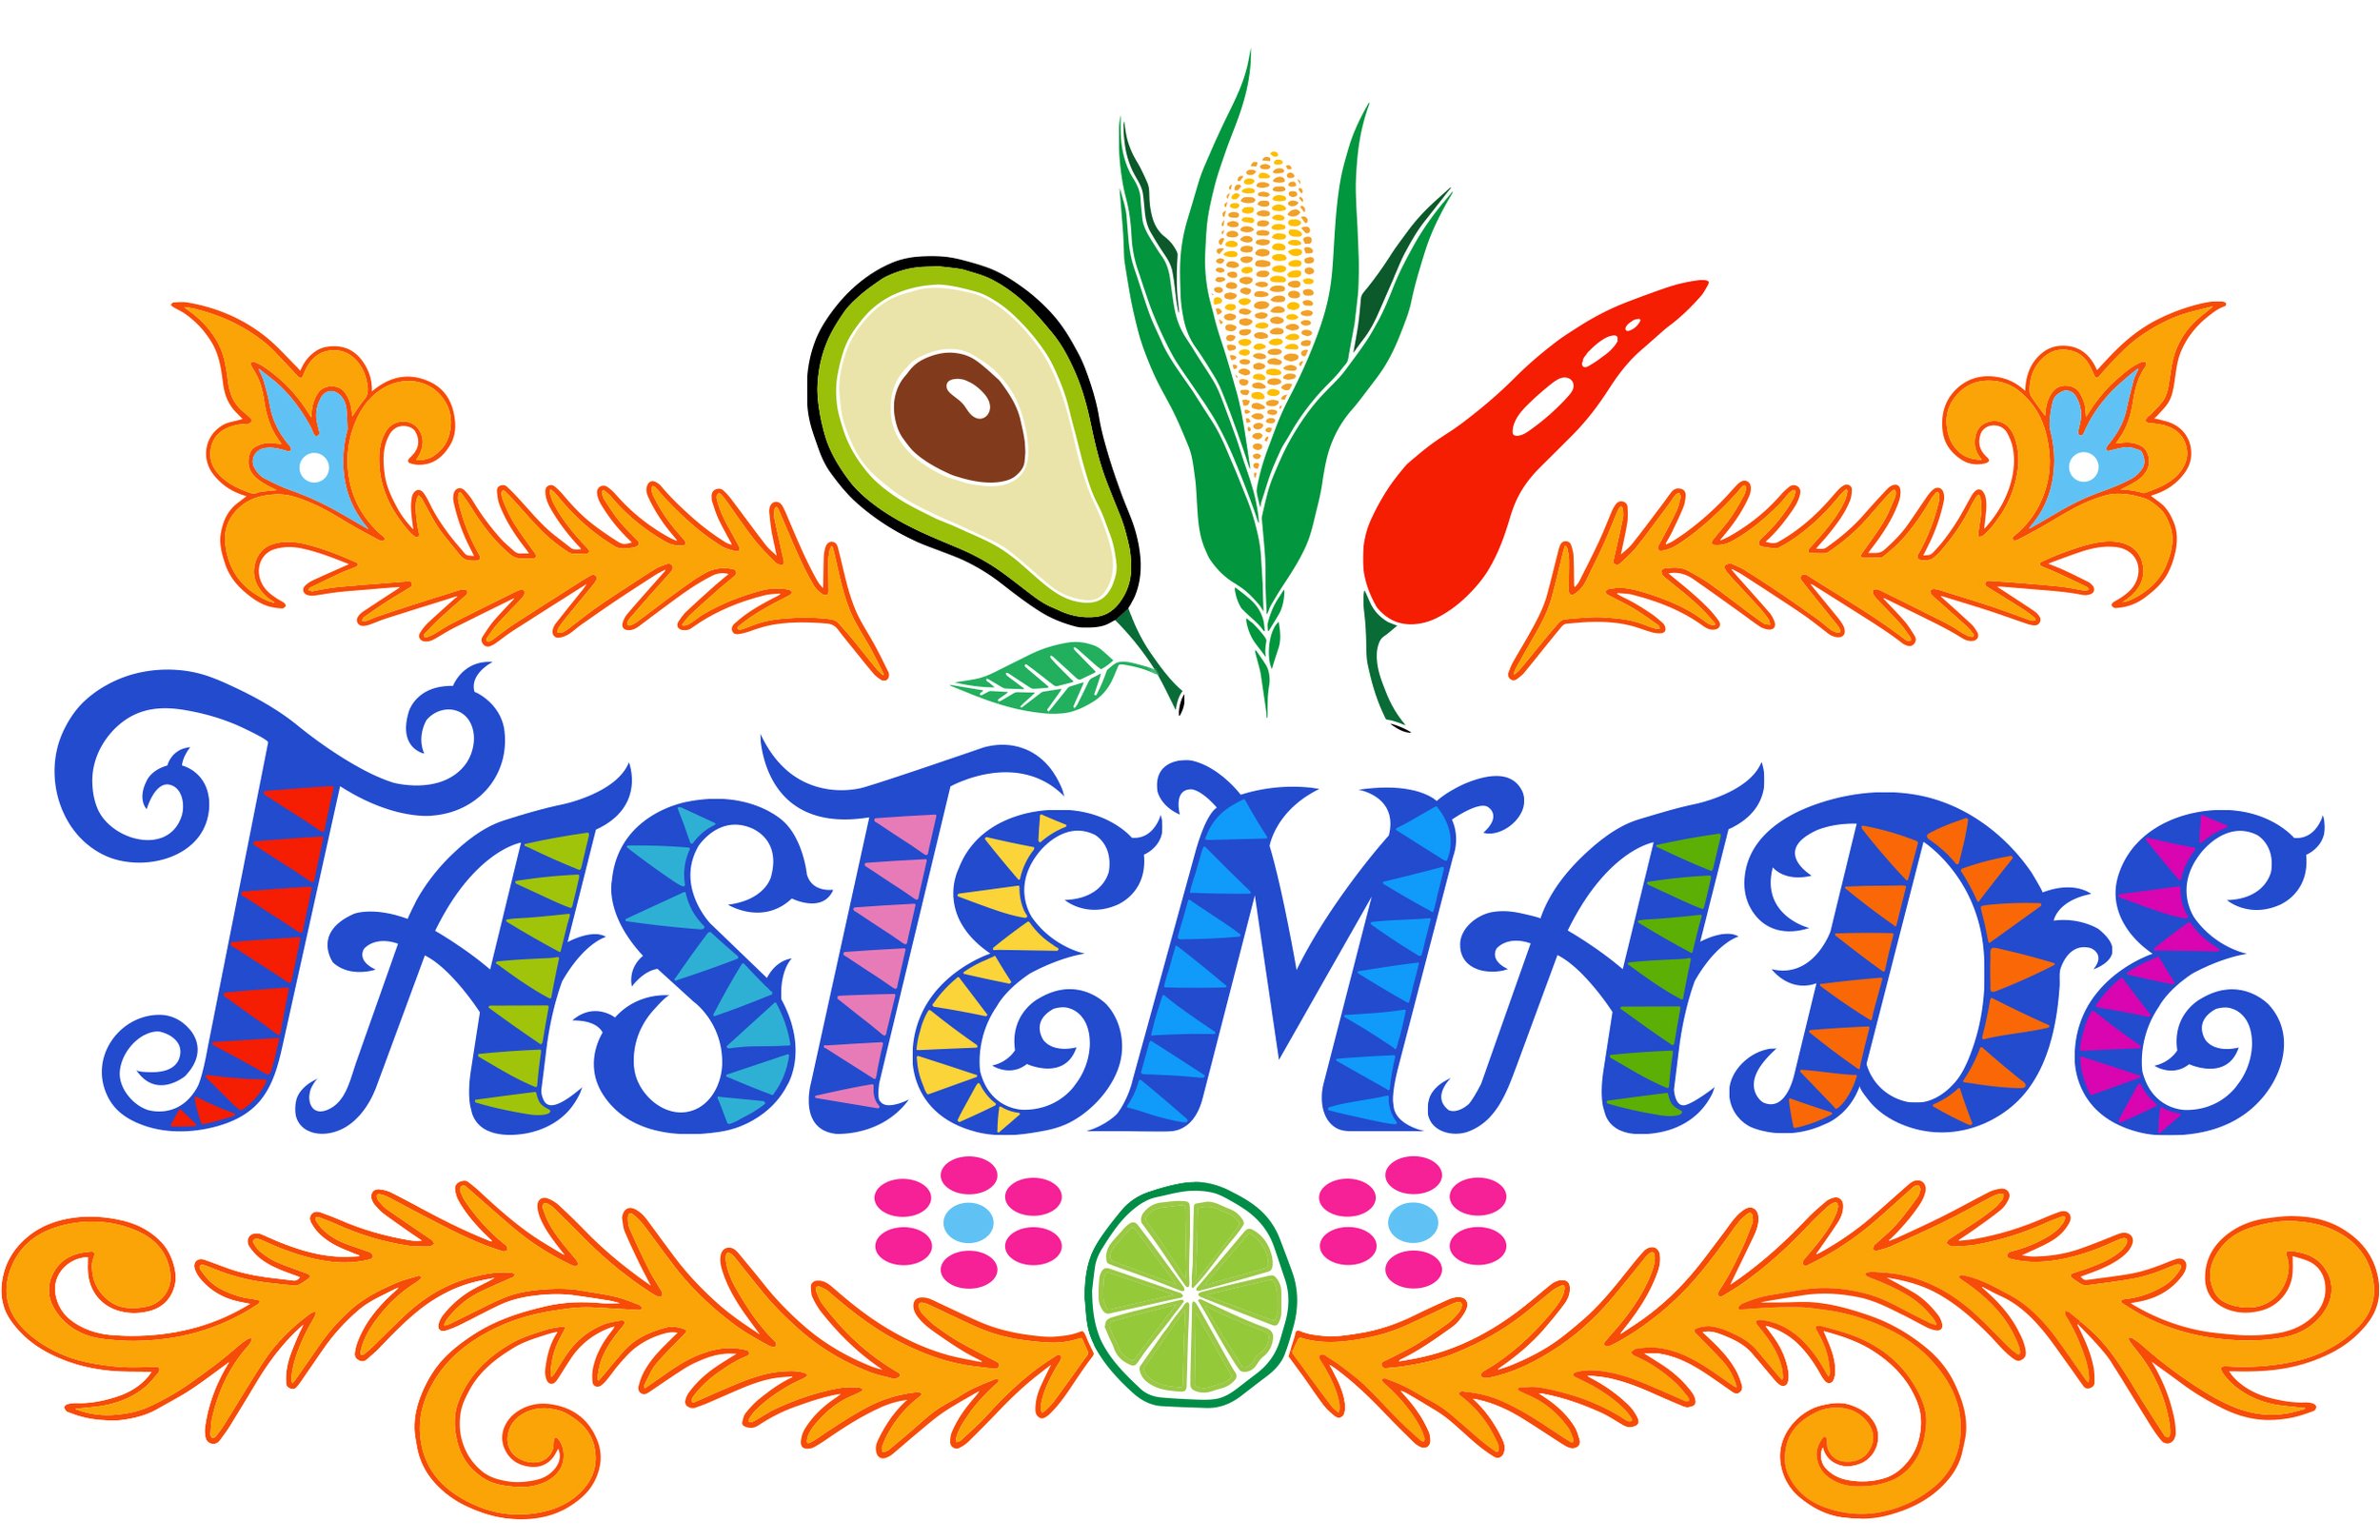 Logo Design commissioned by media company, Tastemade, Inc.